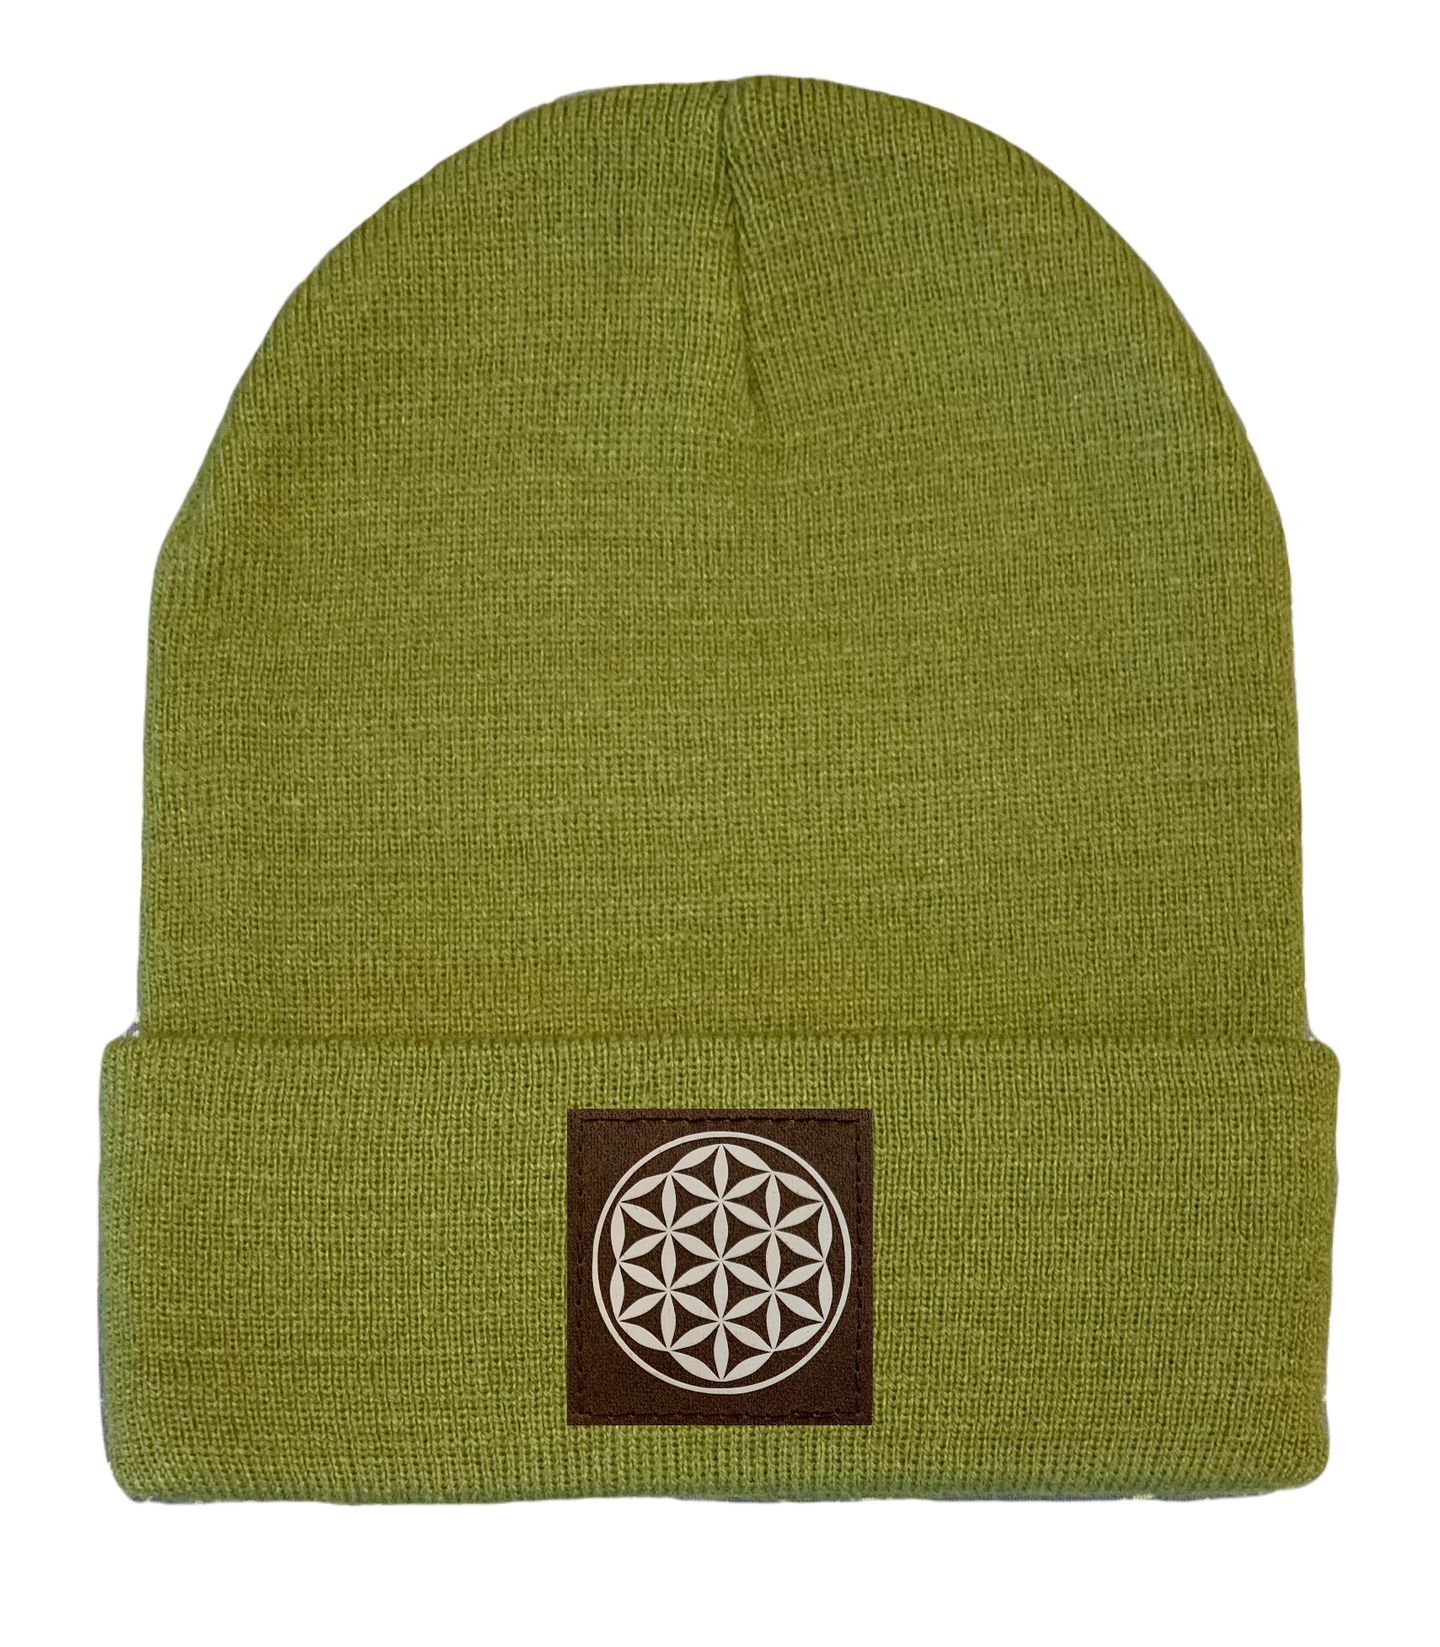 Cuffed Beanie withFlower of Life vegan leather yoga patch by buddha gear